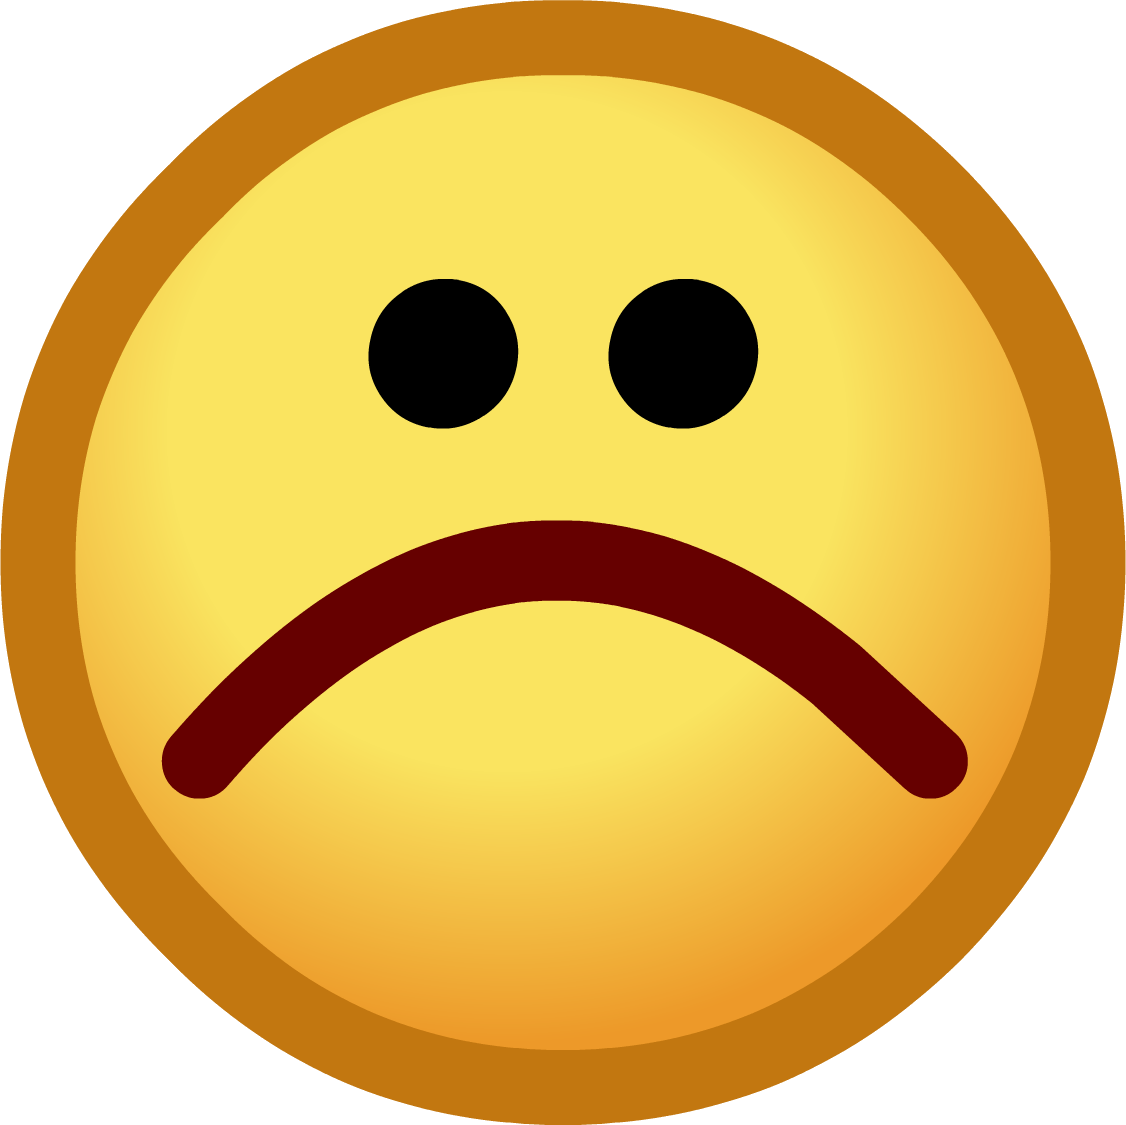 Sad And Angry Smiley - ClipArt Best